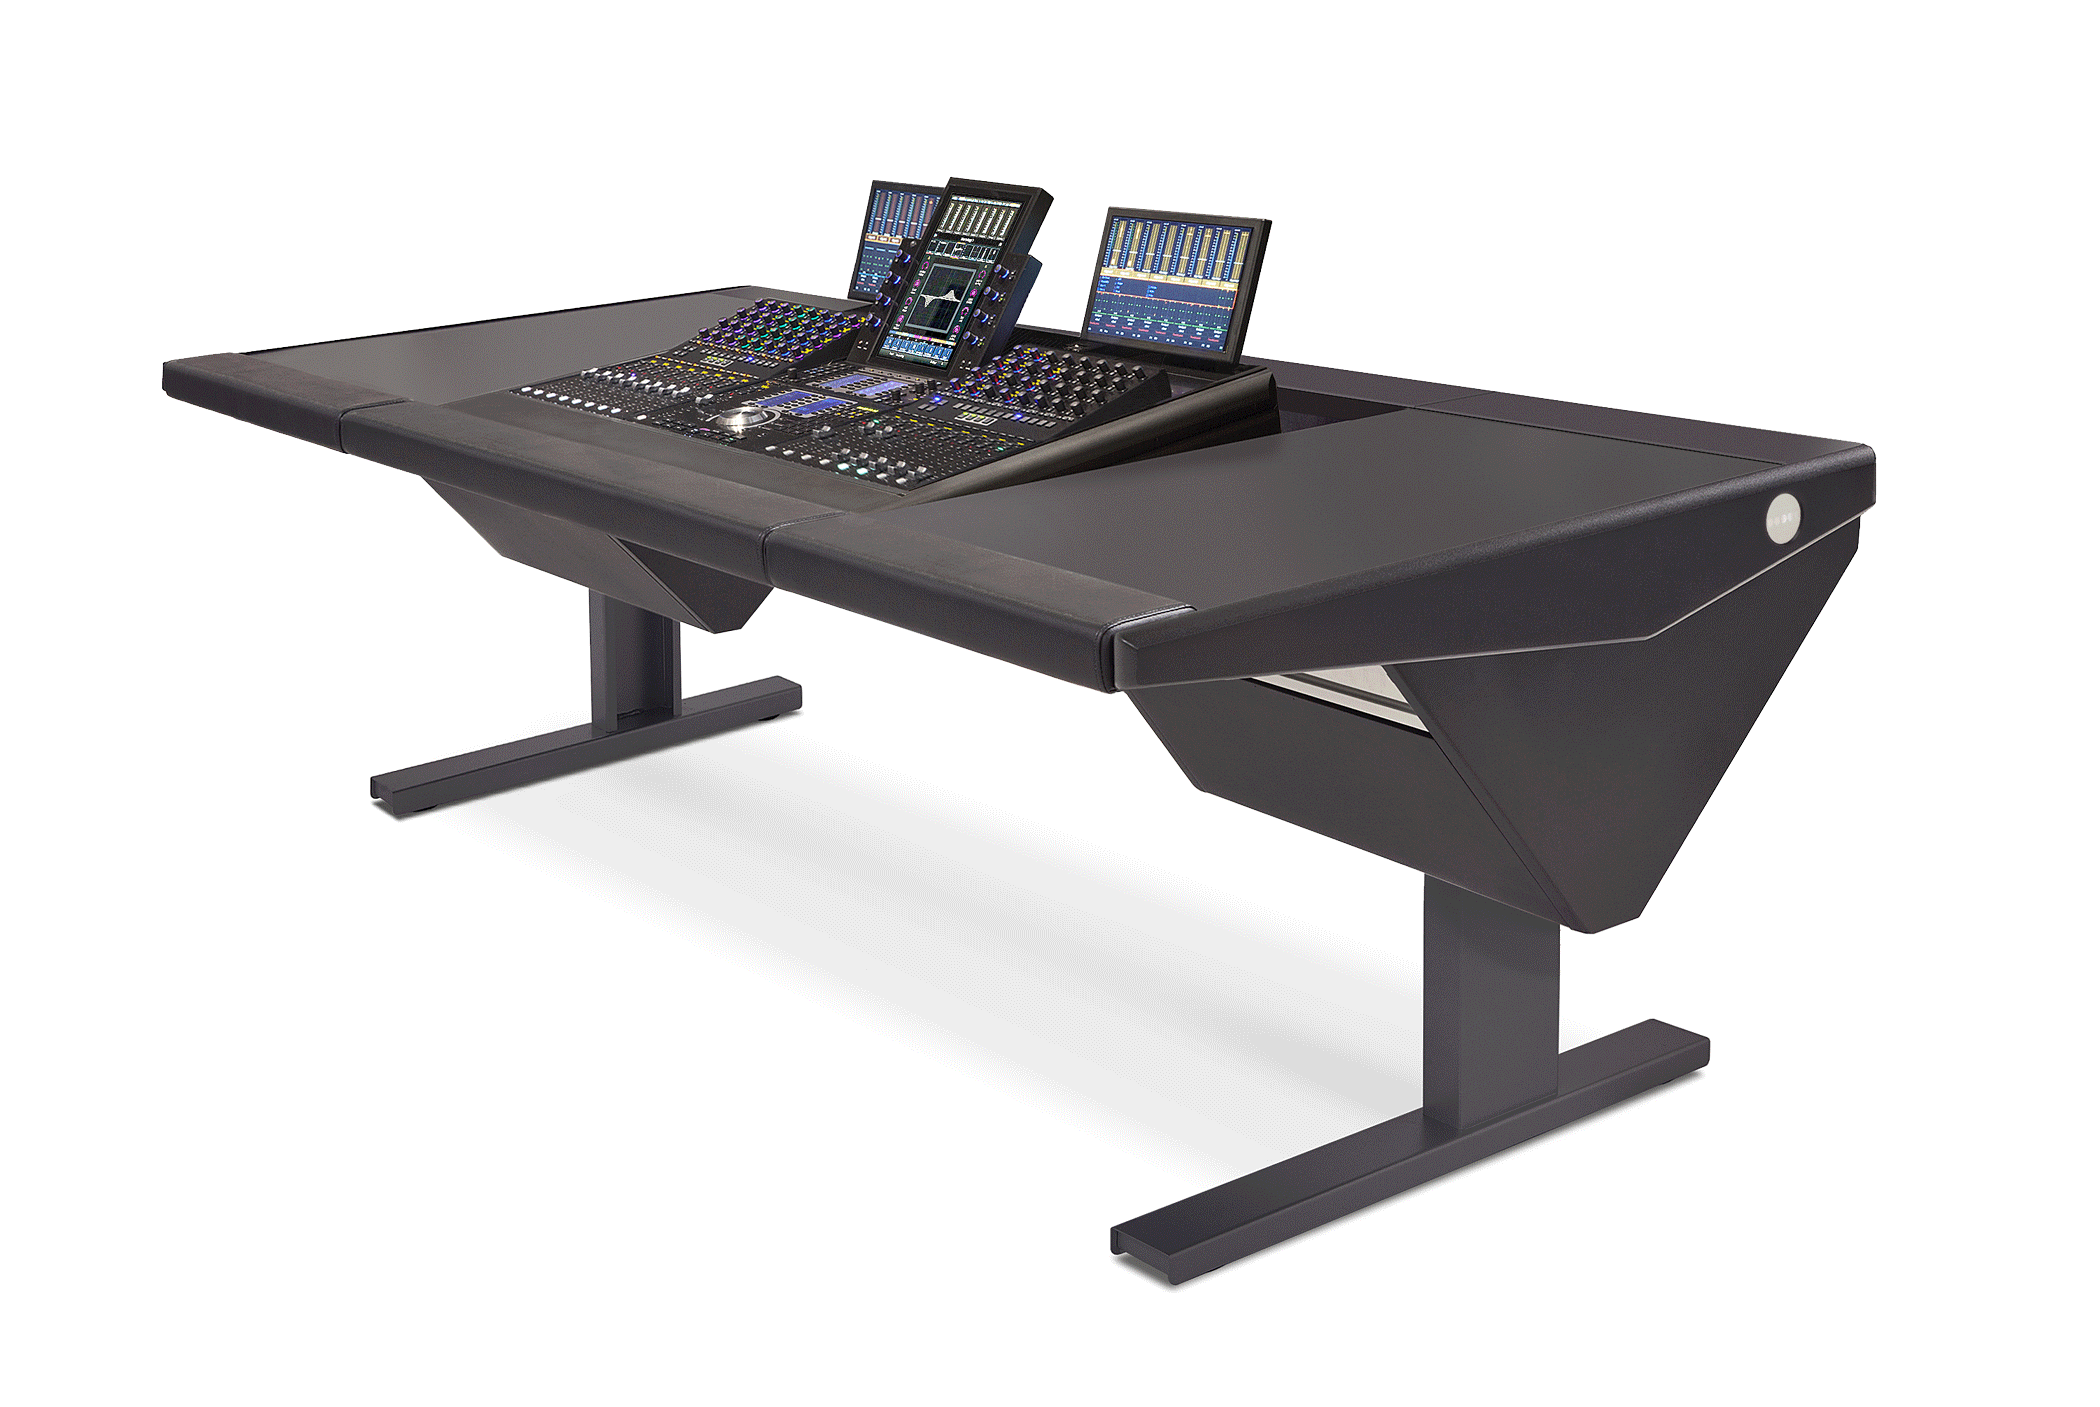 S4 - 3 Foot Wide Base System with Desk (L) and Desk (R)